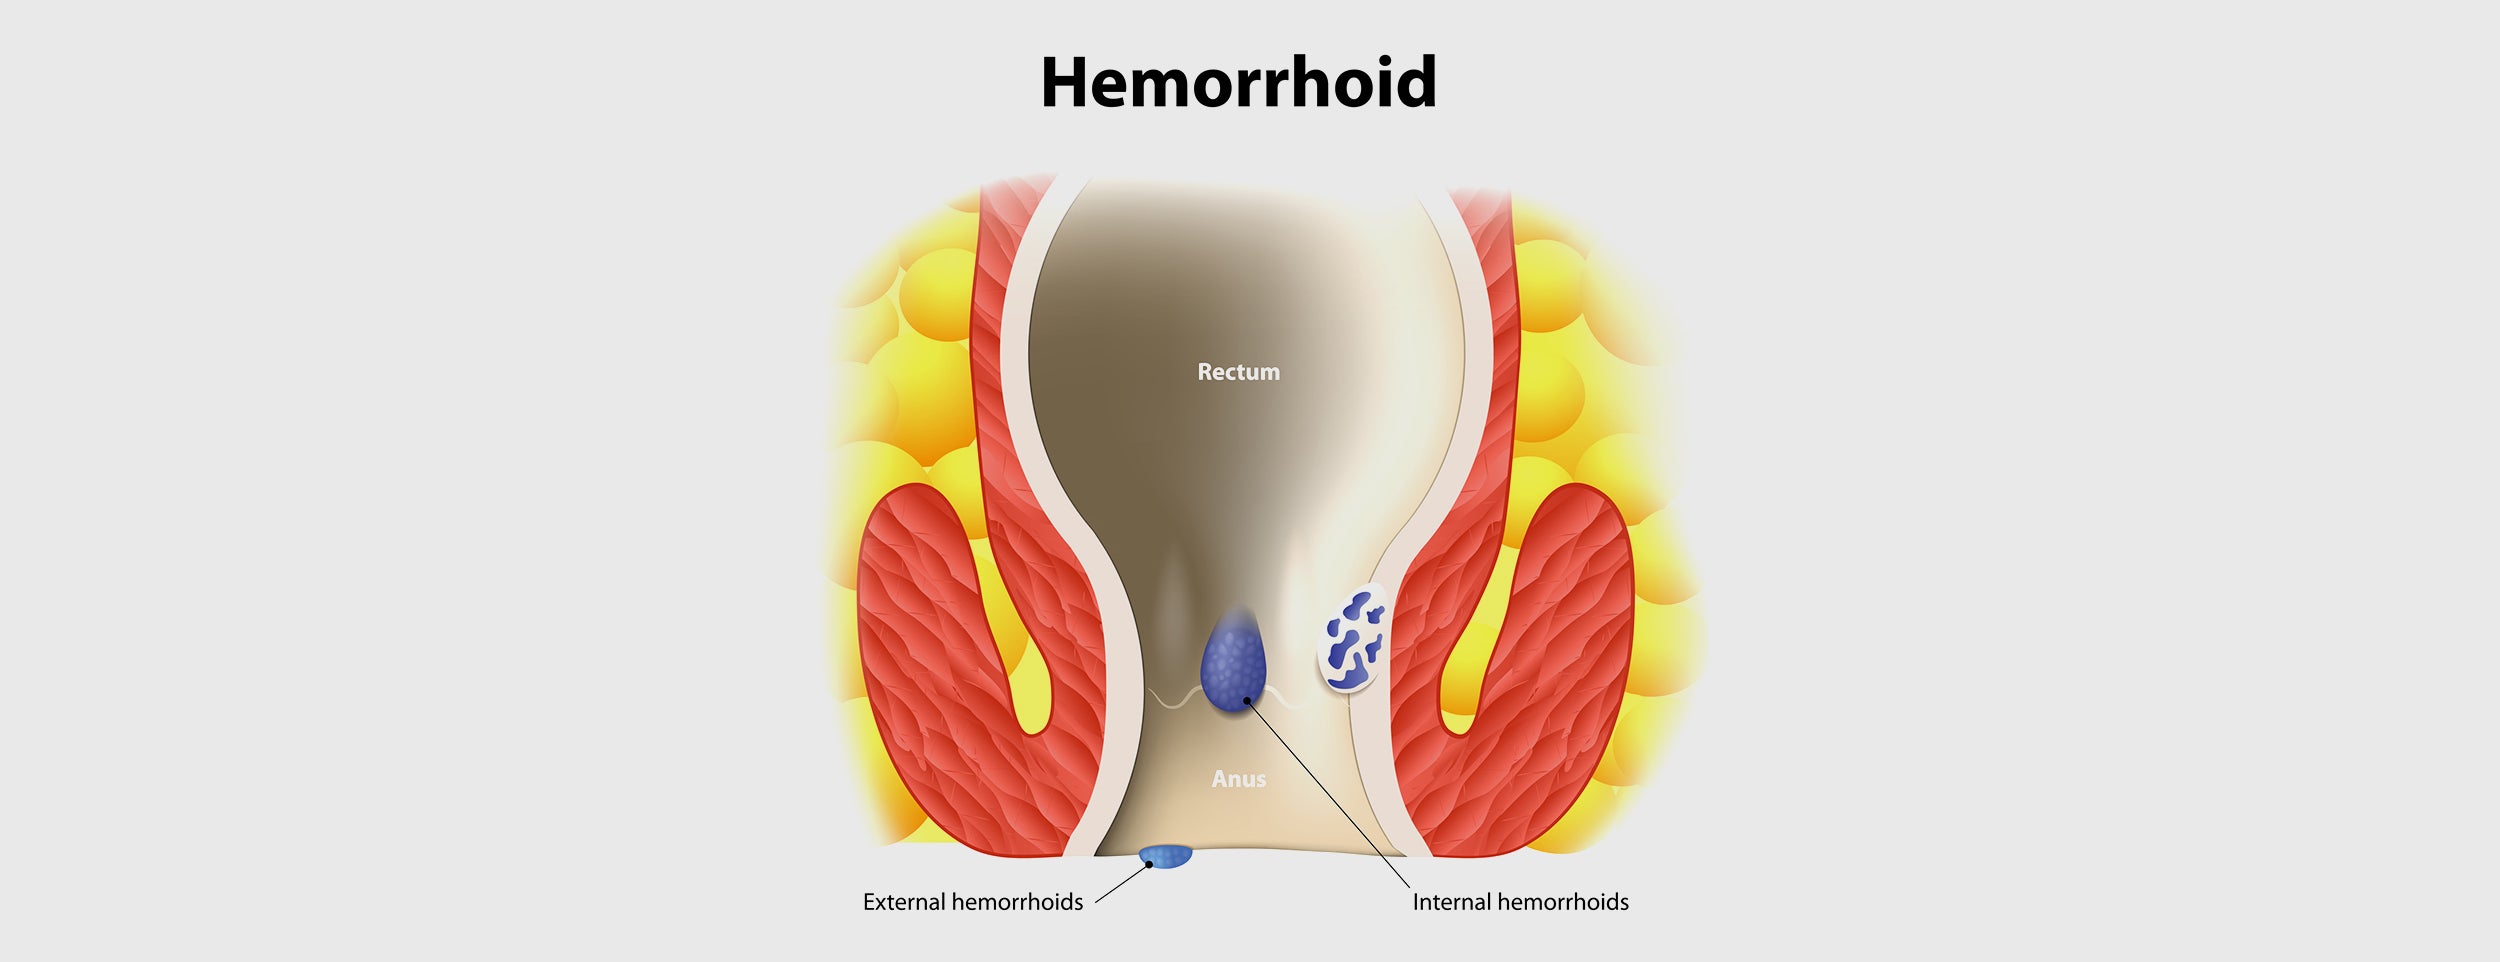 An infection in the anus caused by a hemorrhoid abscess